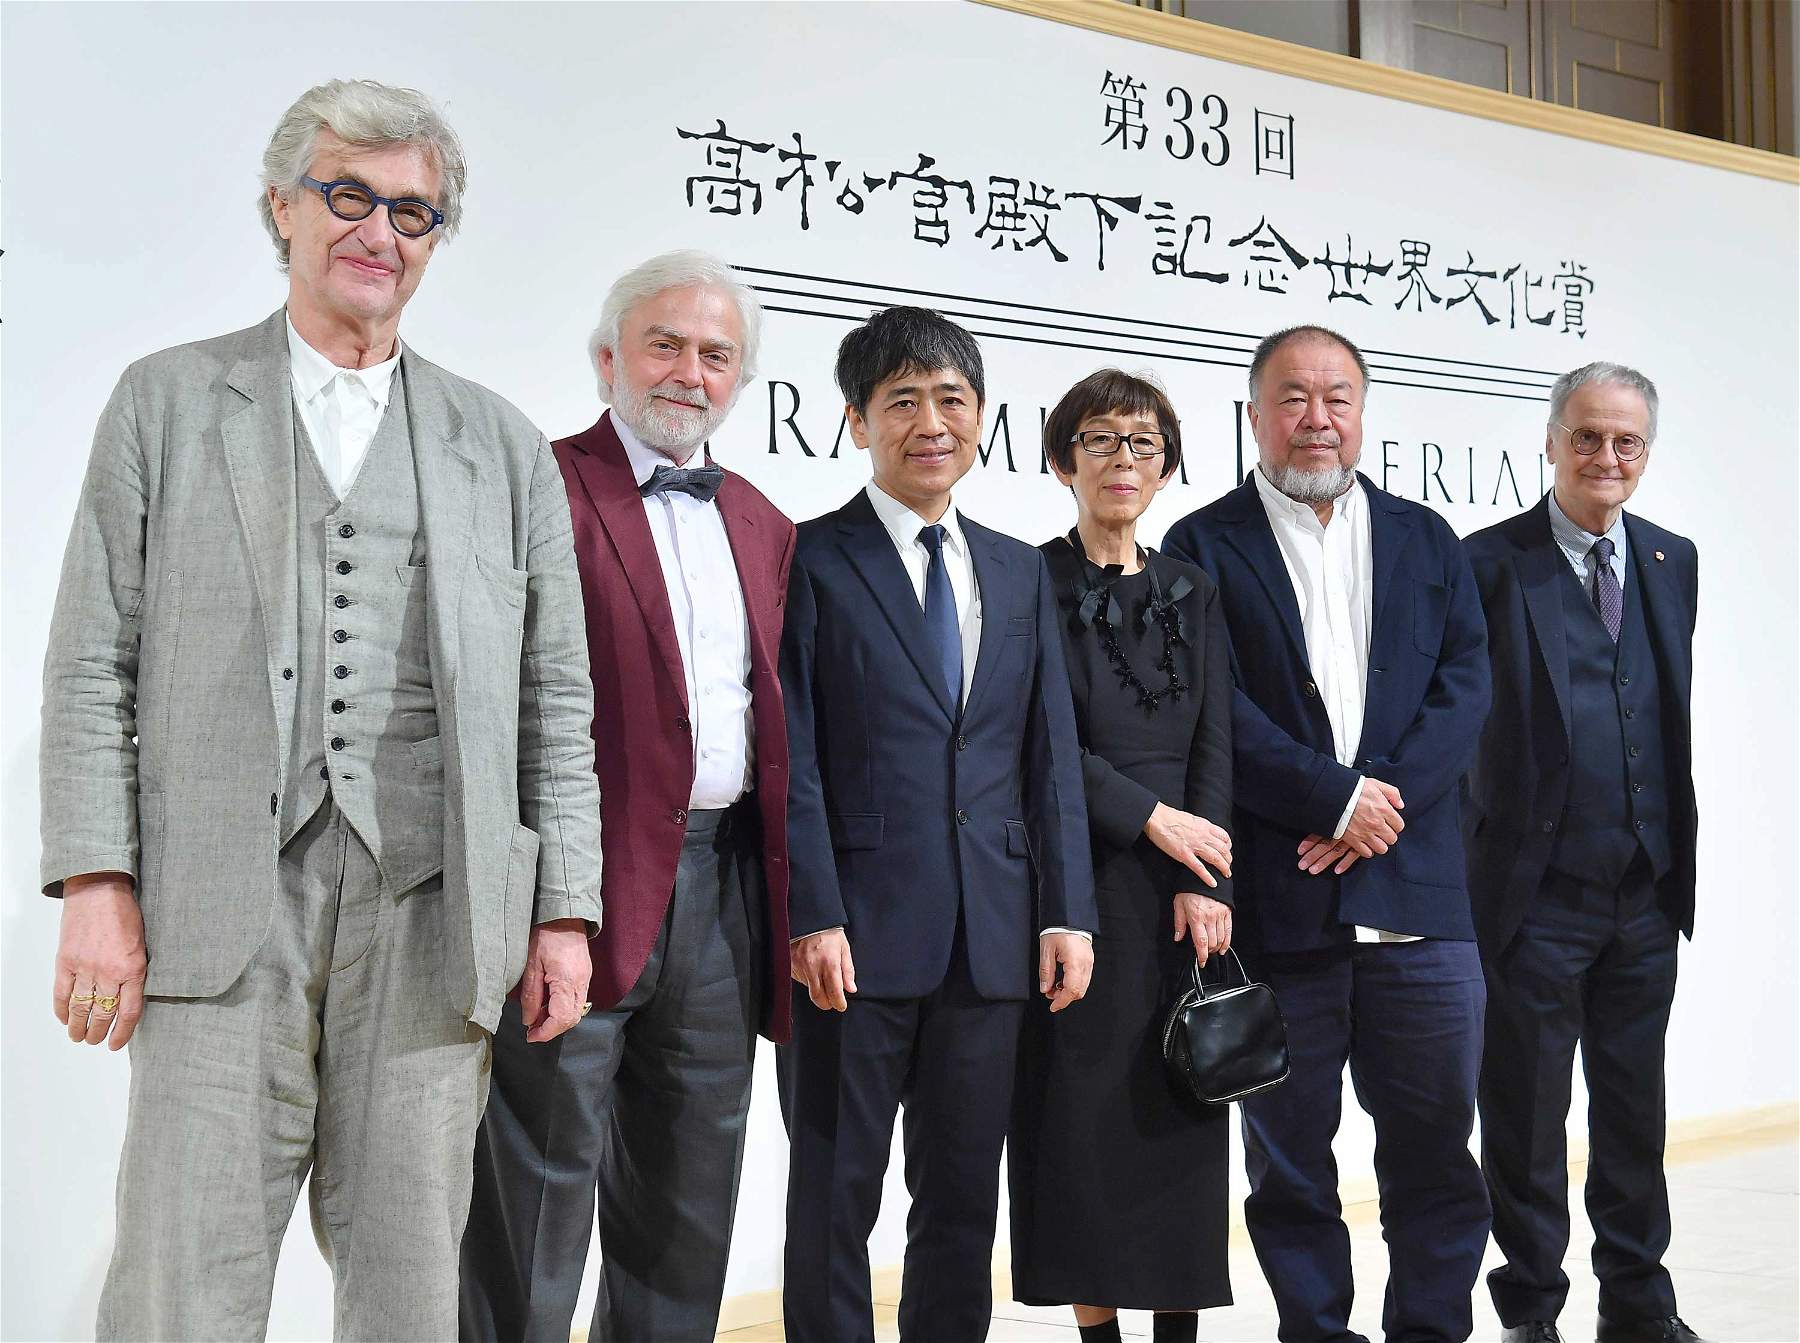 Awarded the Praemium Imperiale 2022. Among the winners are Ai Weiwei, Giulio Paolini and Wim Wenders